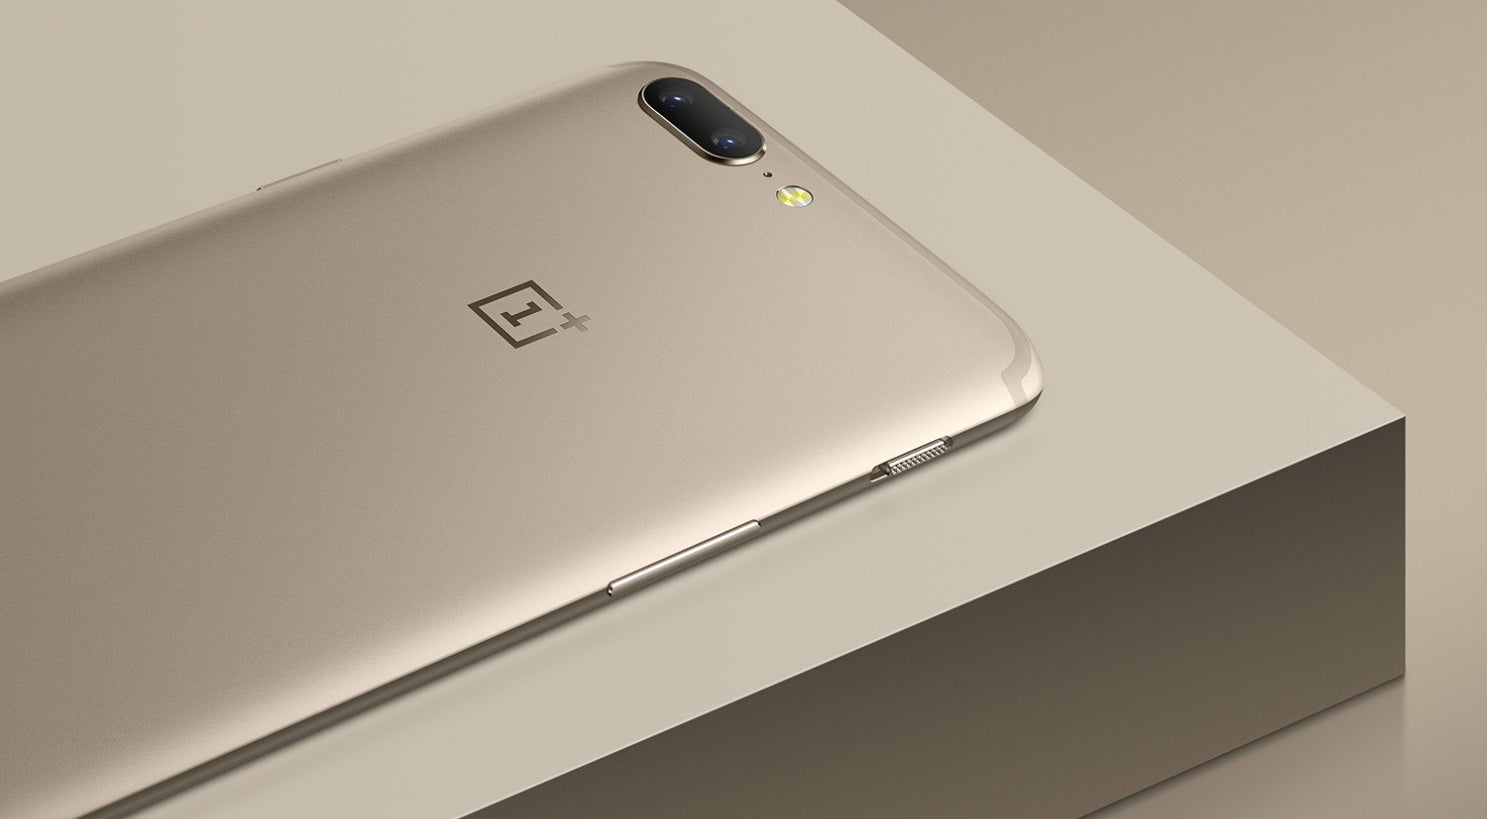 OnePlus has improved its manufacturing process for a 30% finer finish on the new gold OP5 - OnePlus 5 is now available in lush Soft Gold